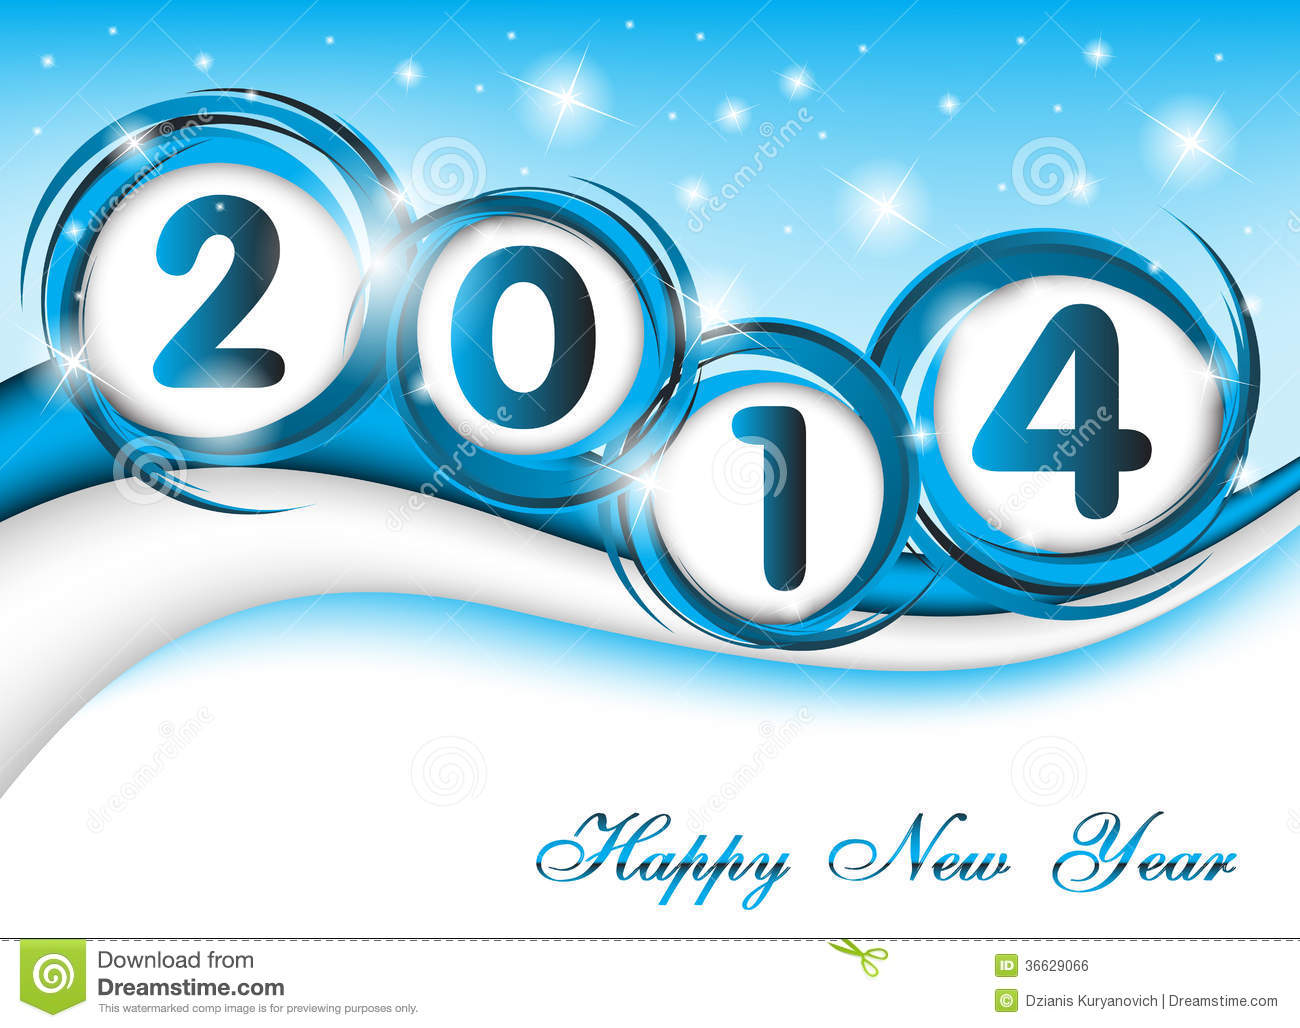 New Year 2014 In Blue Background Royalty Free Stock Image   Image